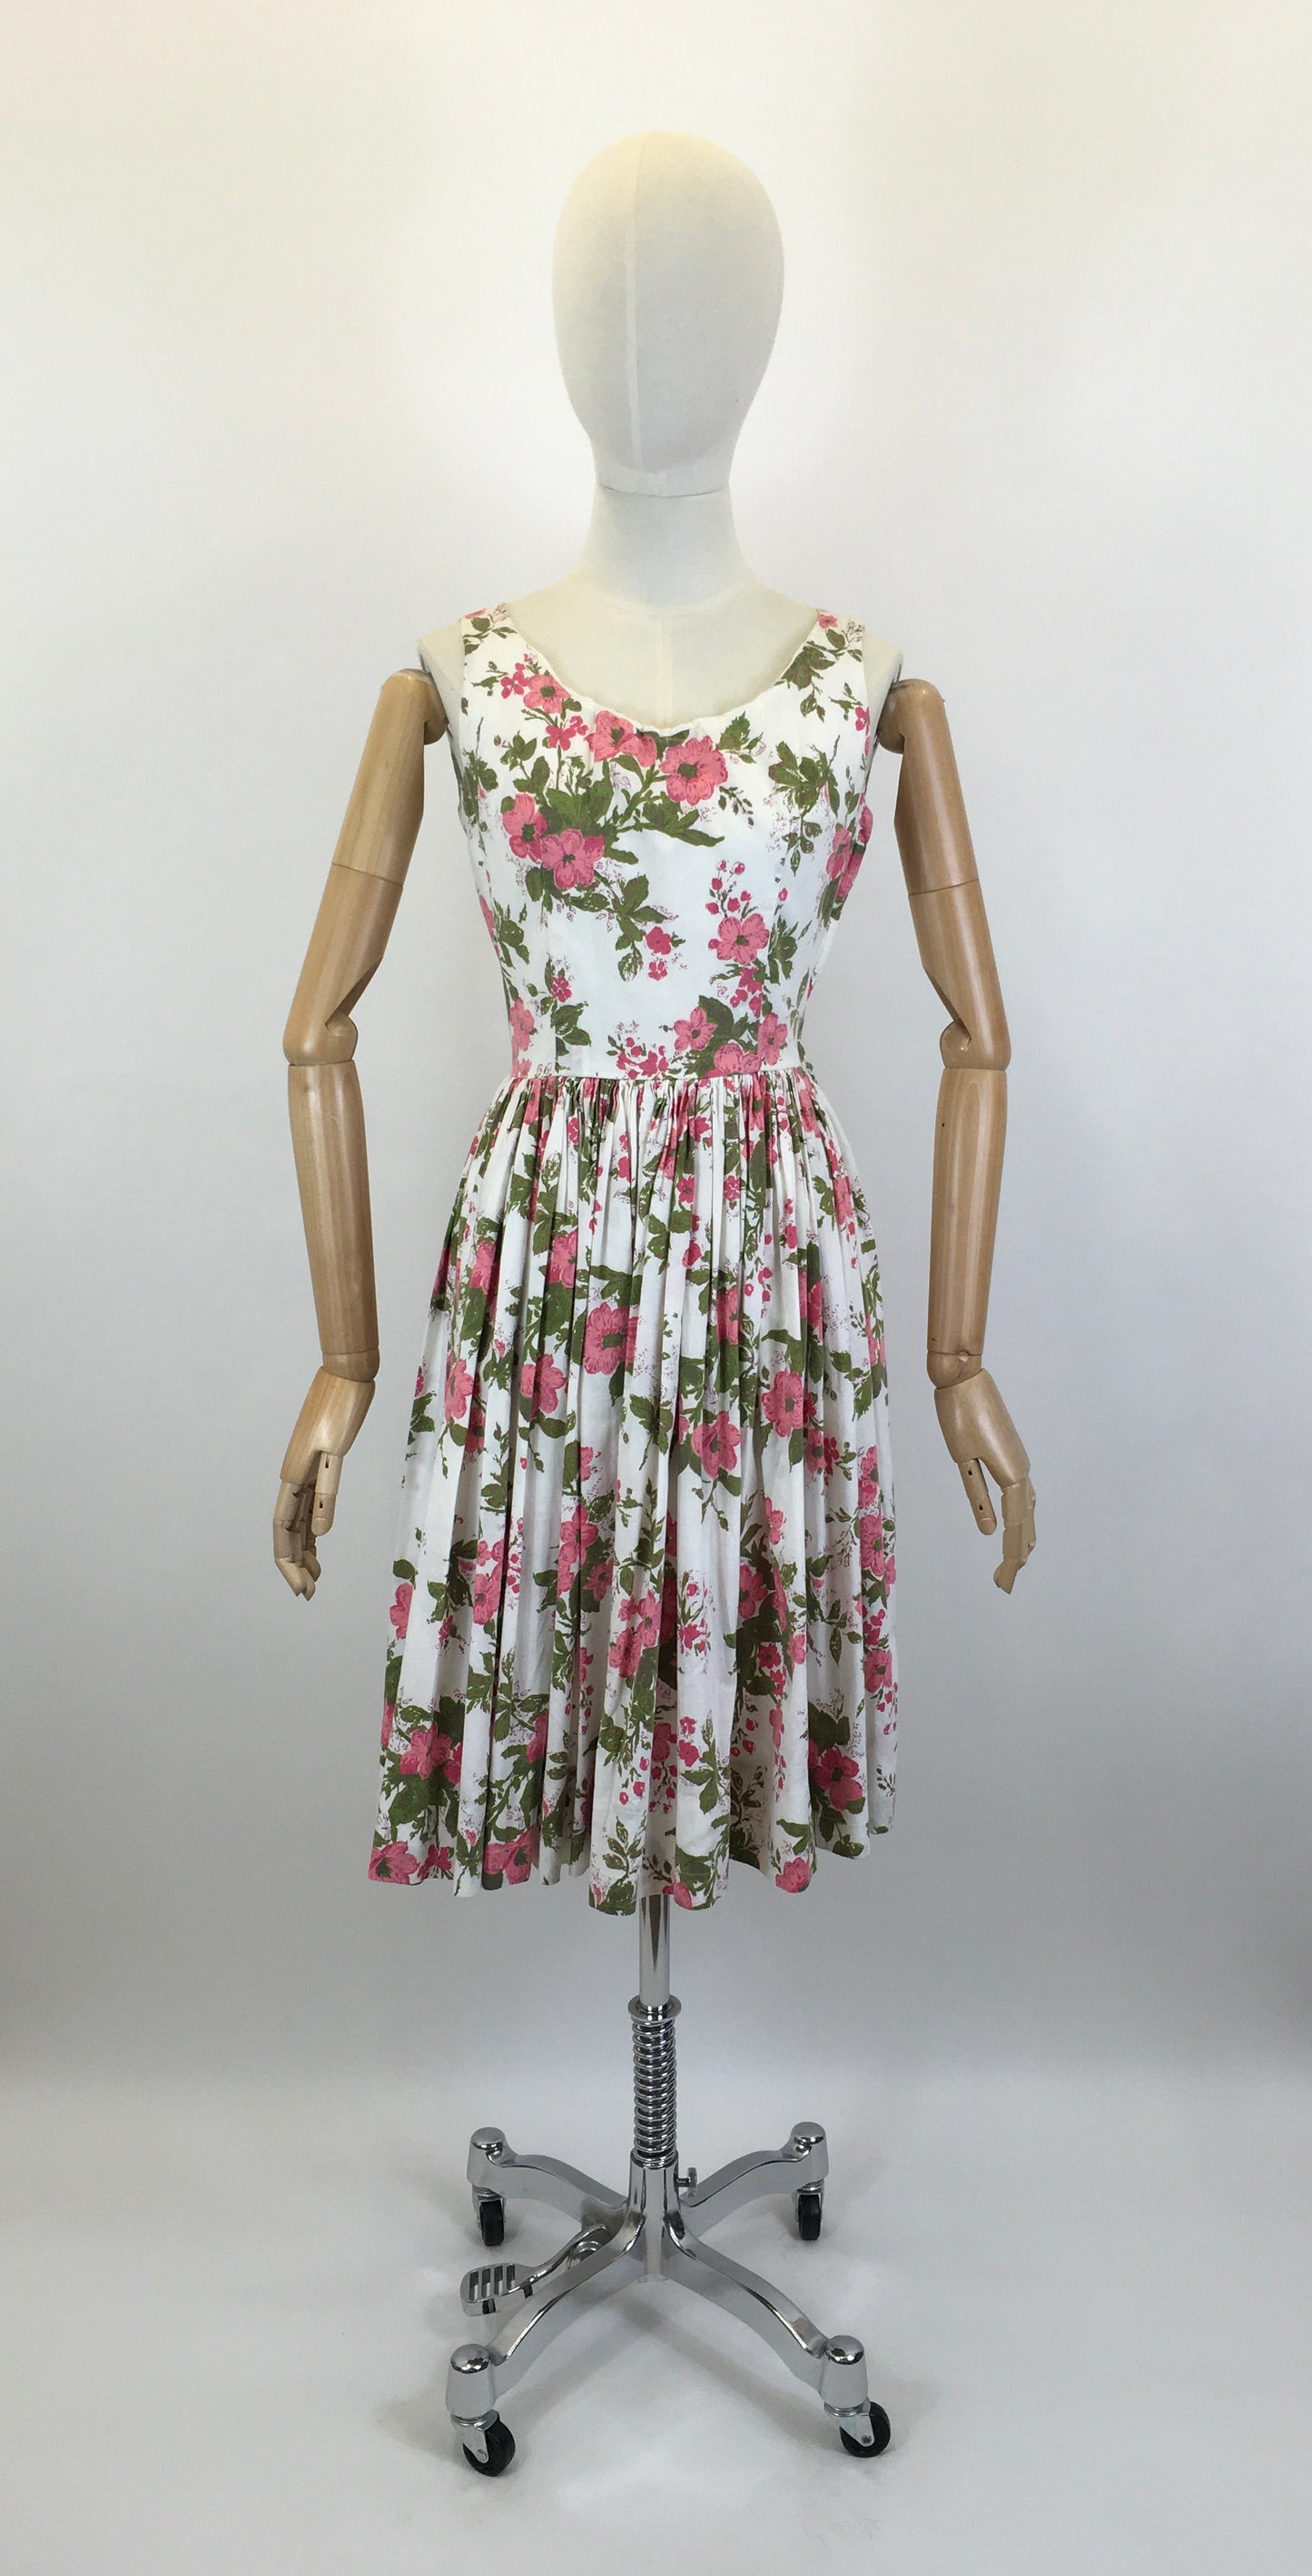 Original 1950’s Darling Cotton Sundress - In A Pink Floral with Green Fauna